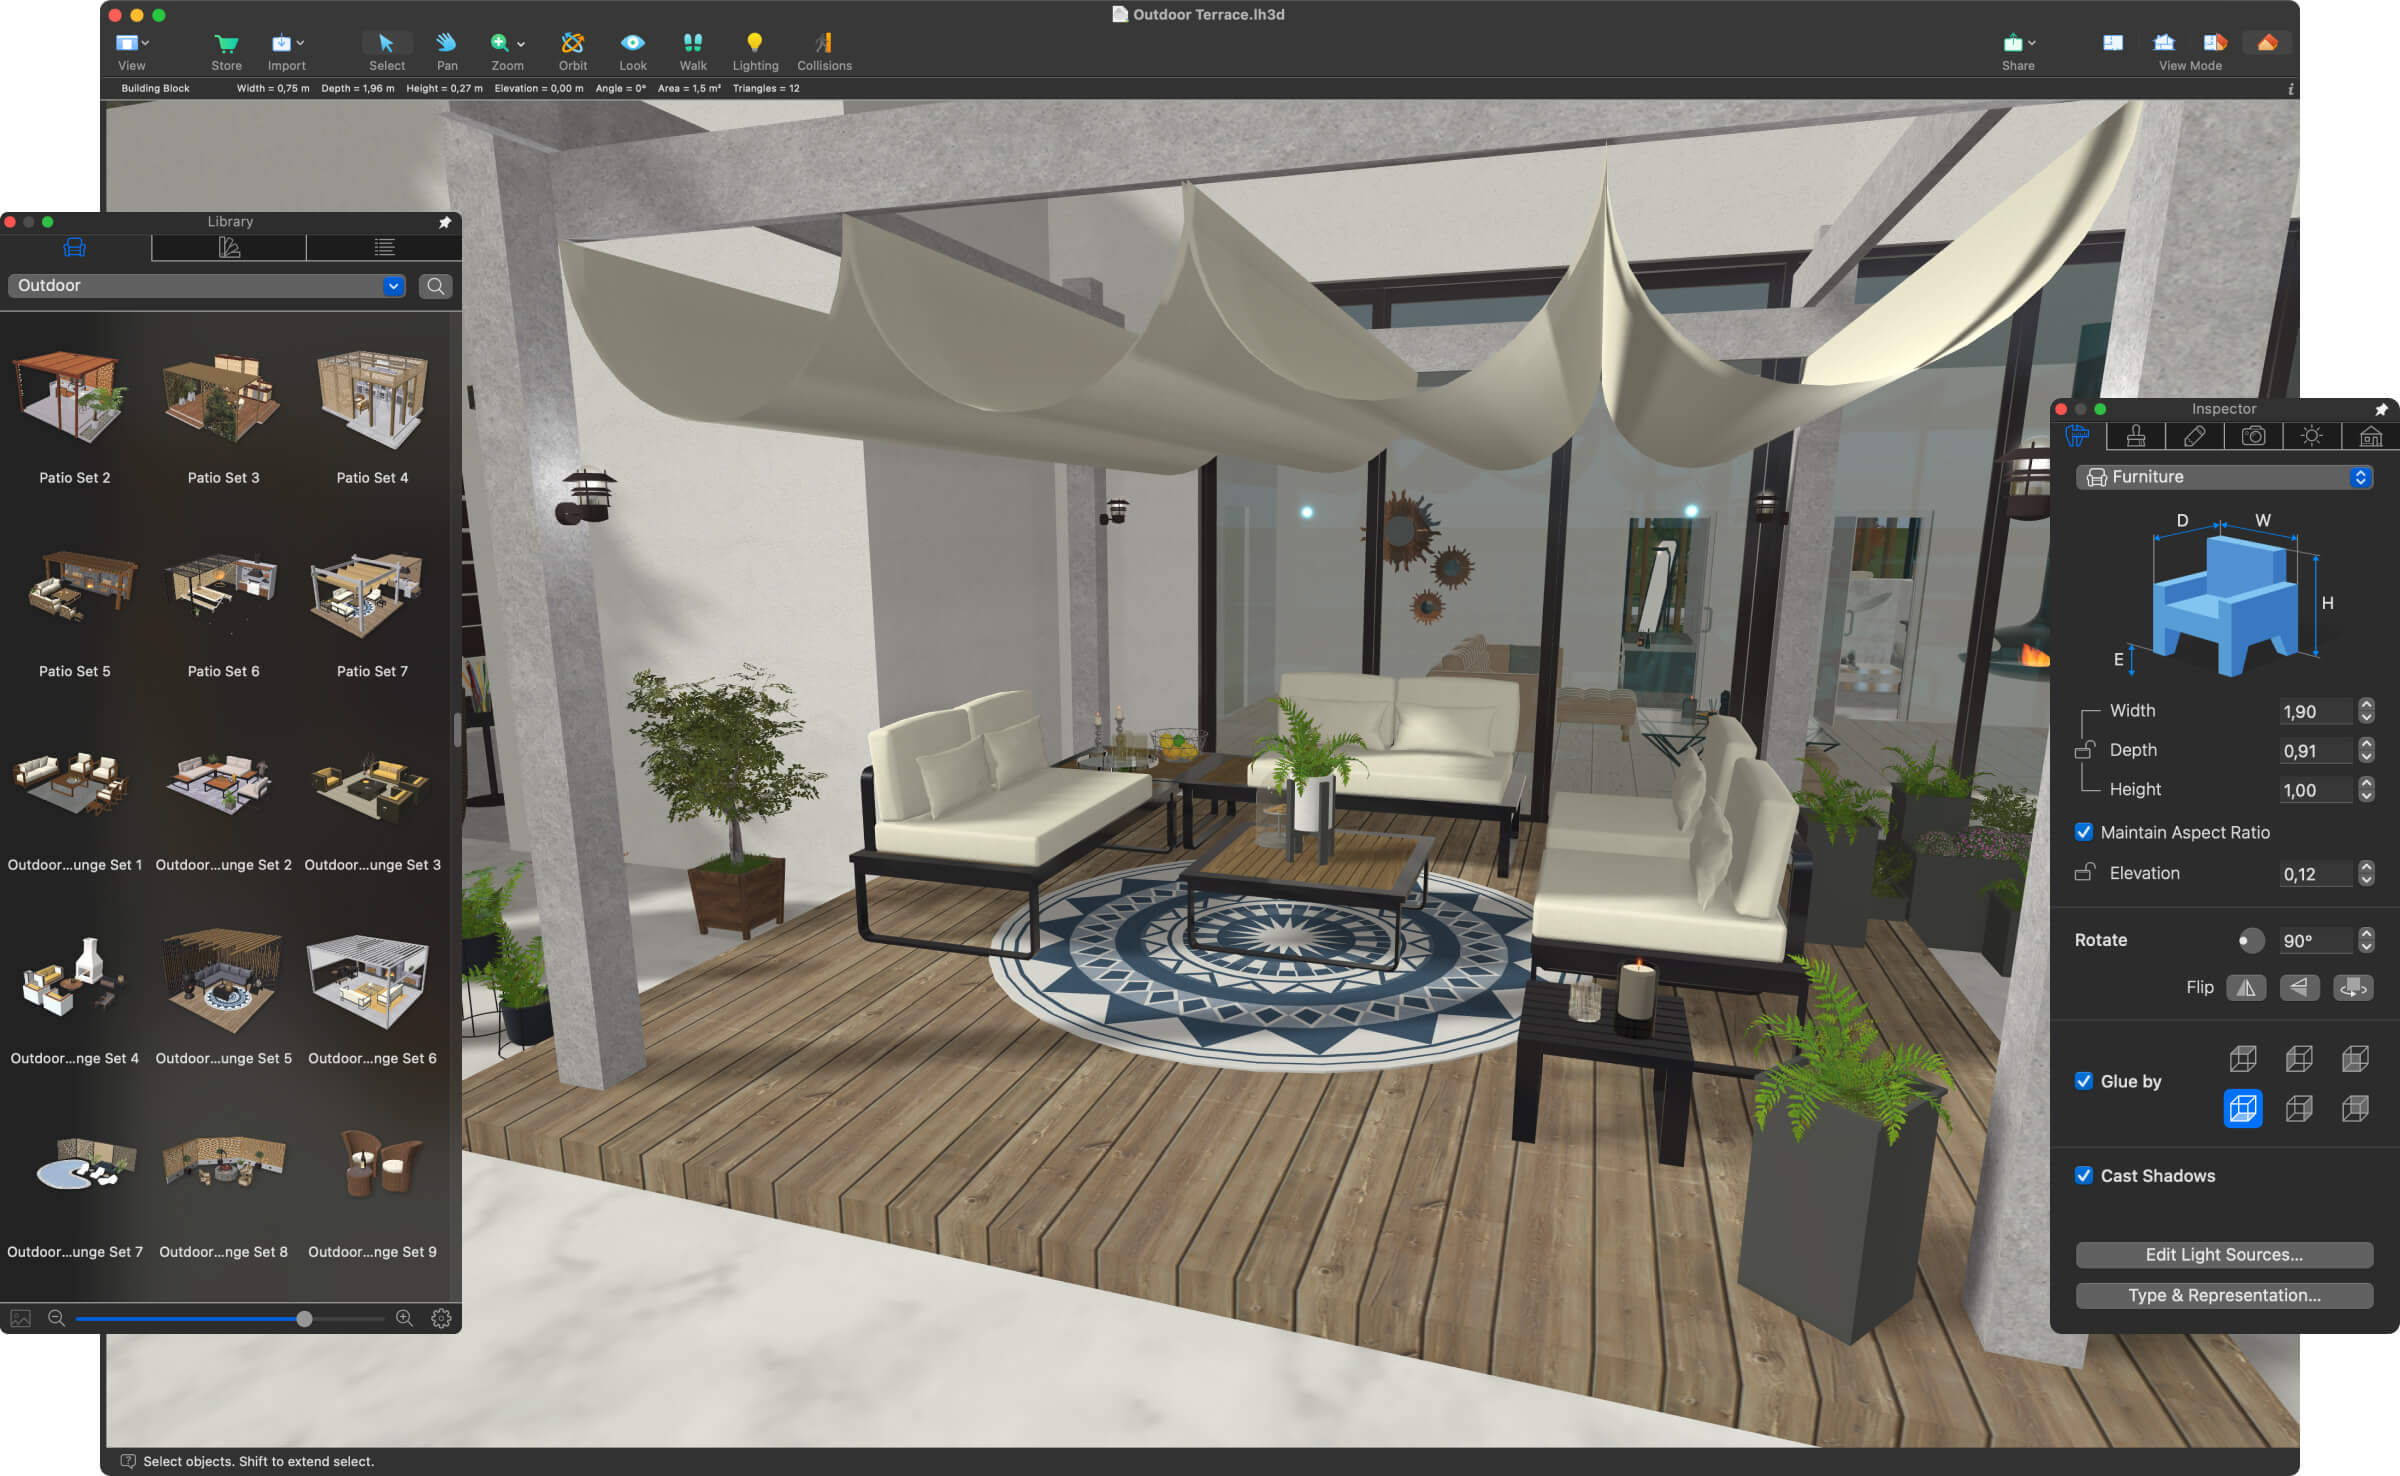 A terrace design project opened in the Live Home 3D home design app.